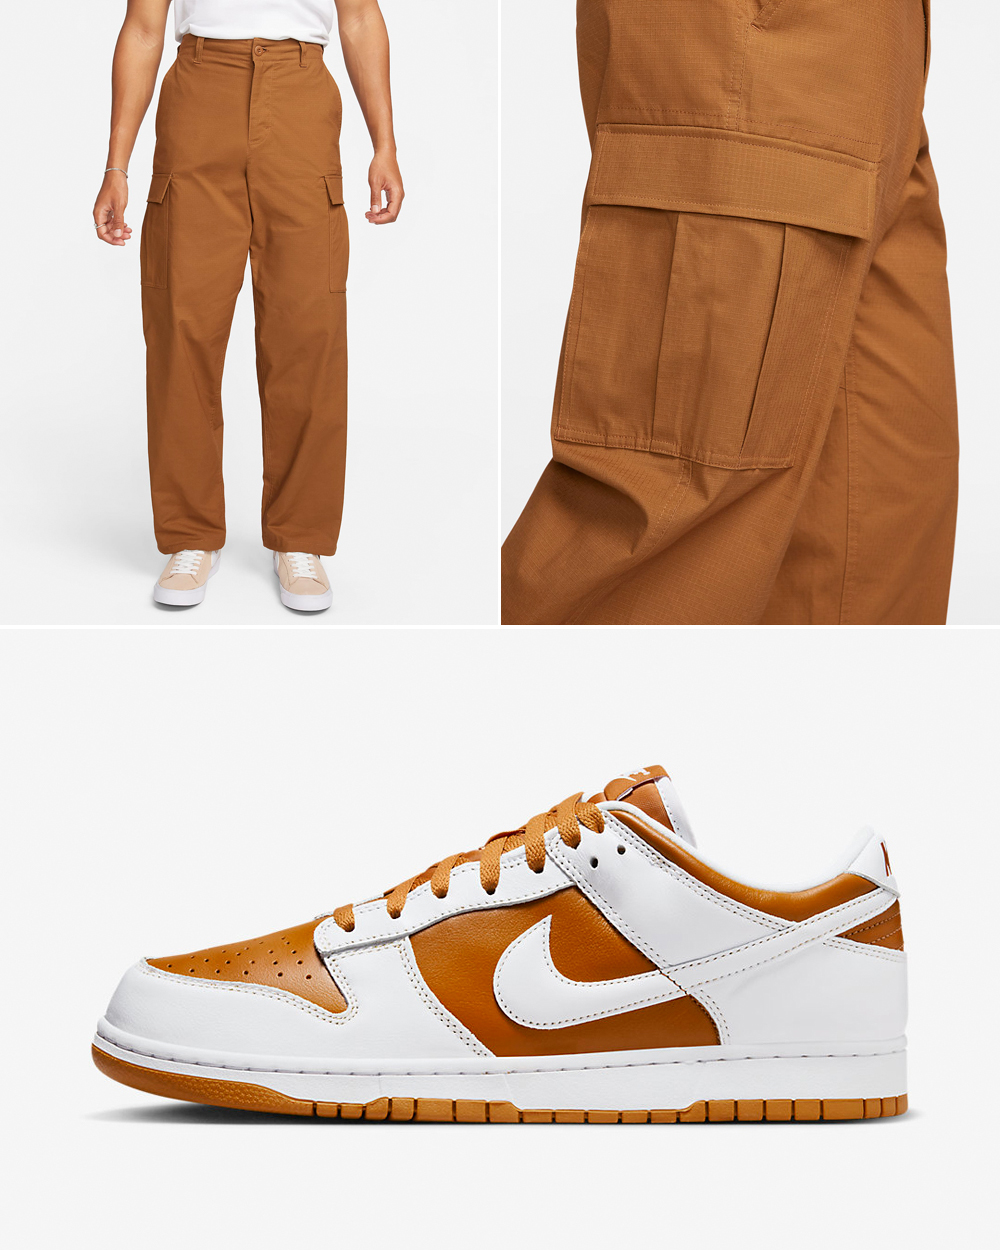 Nike-Dunk-Low-Reverse-Curry-Cargo-Pant-Matching-Outfit